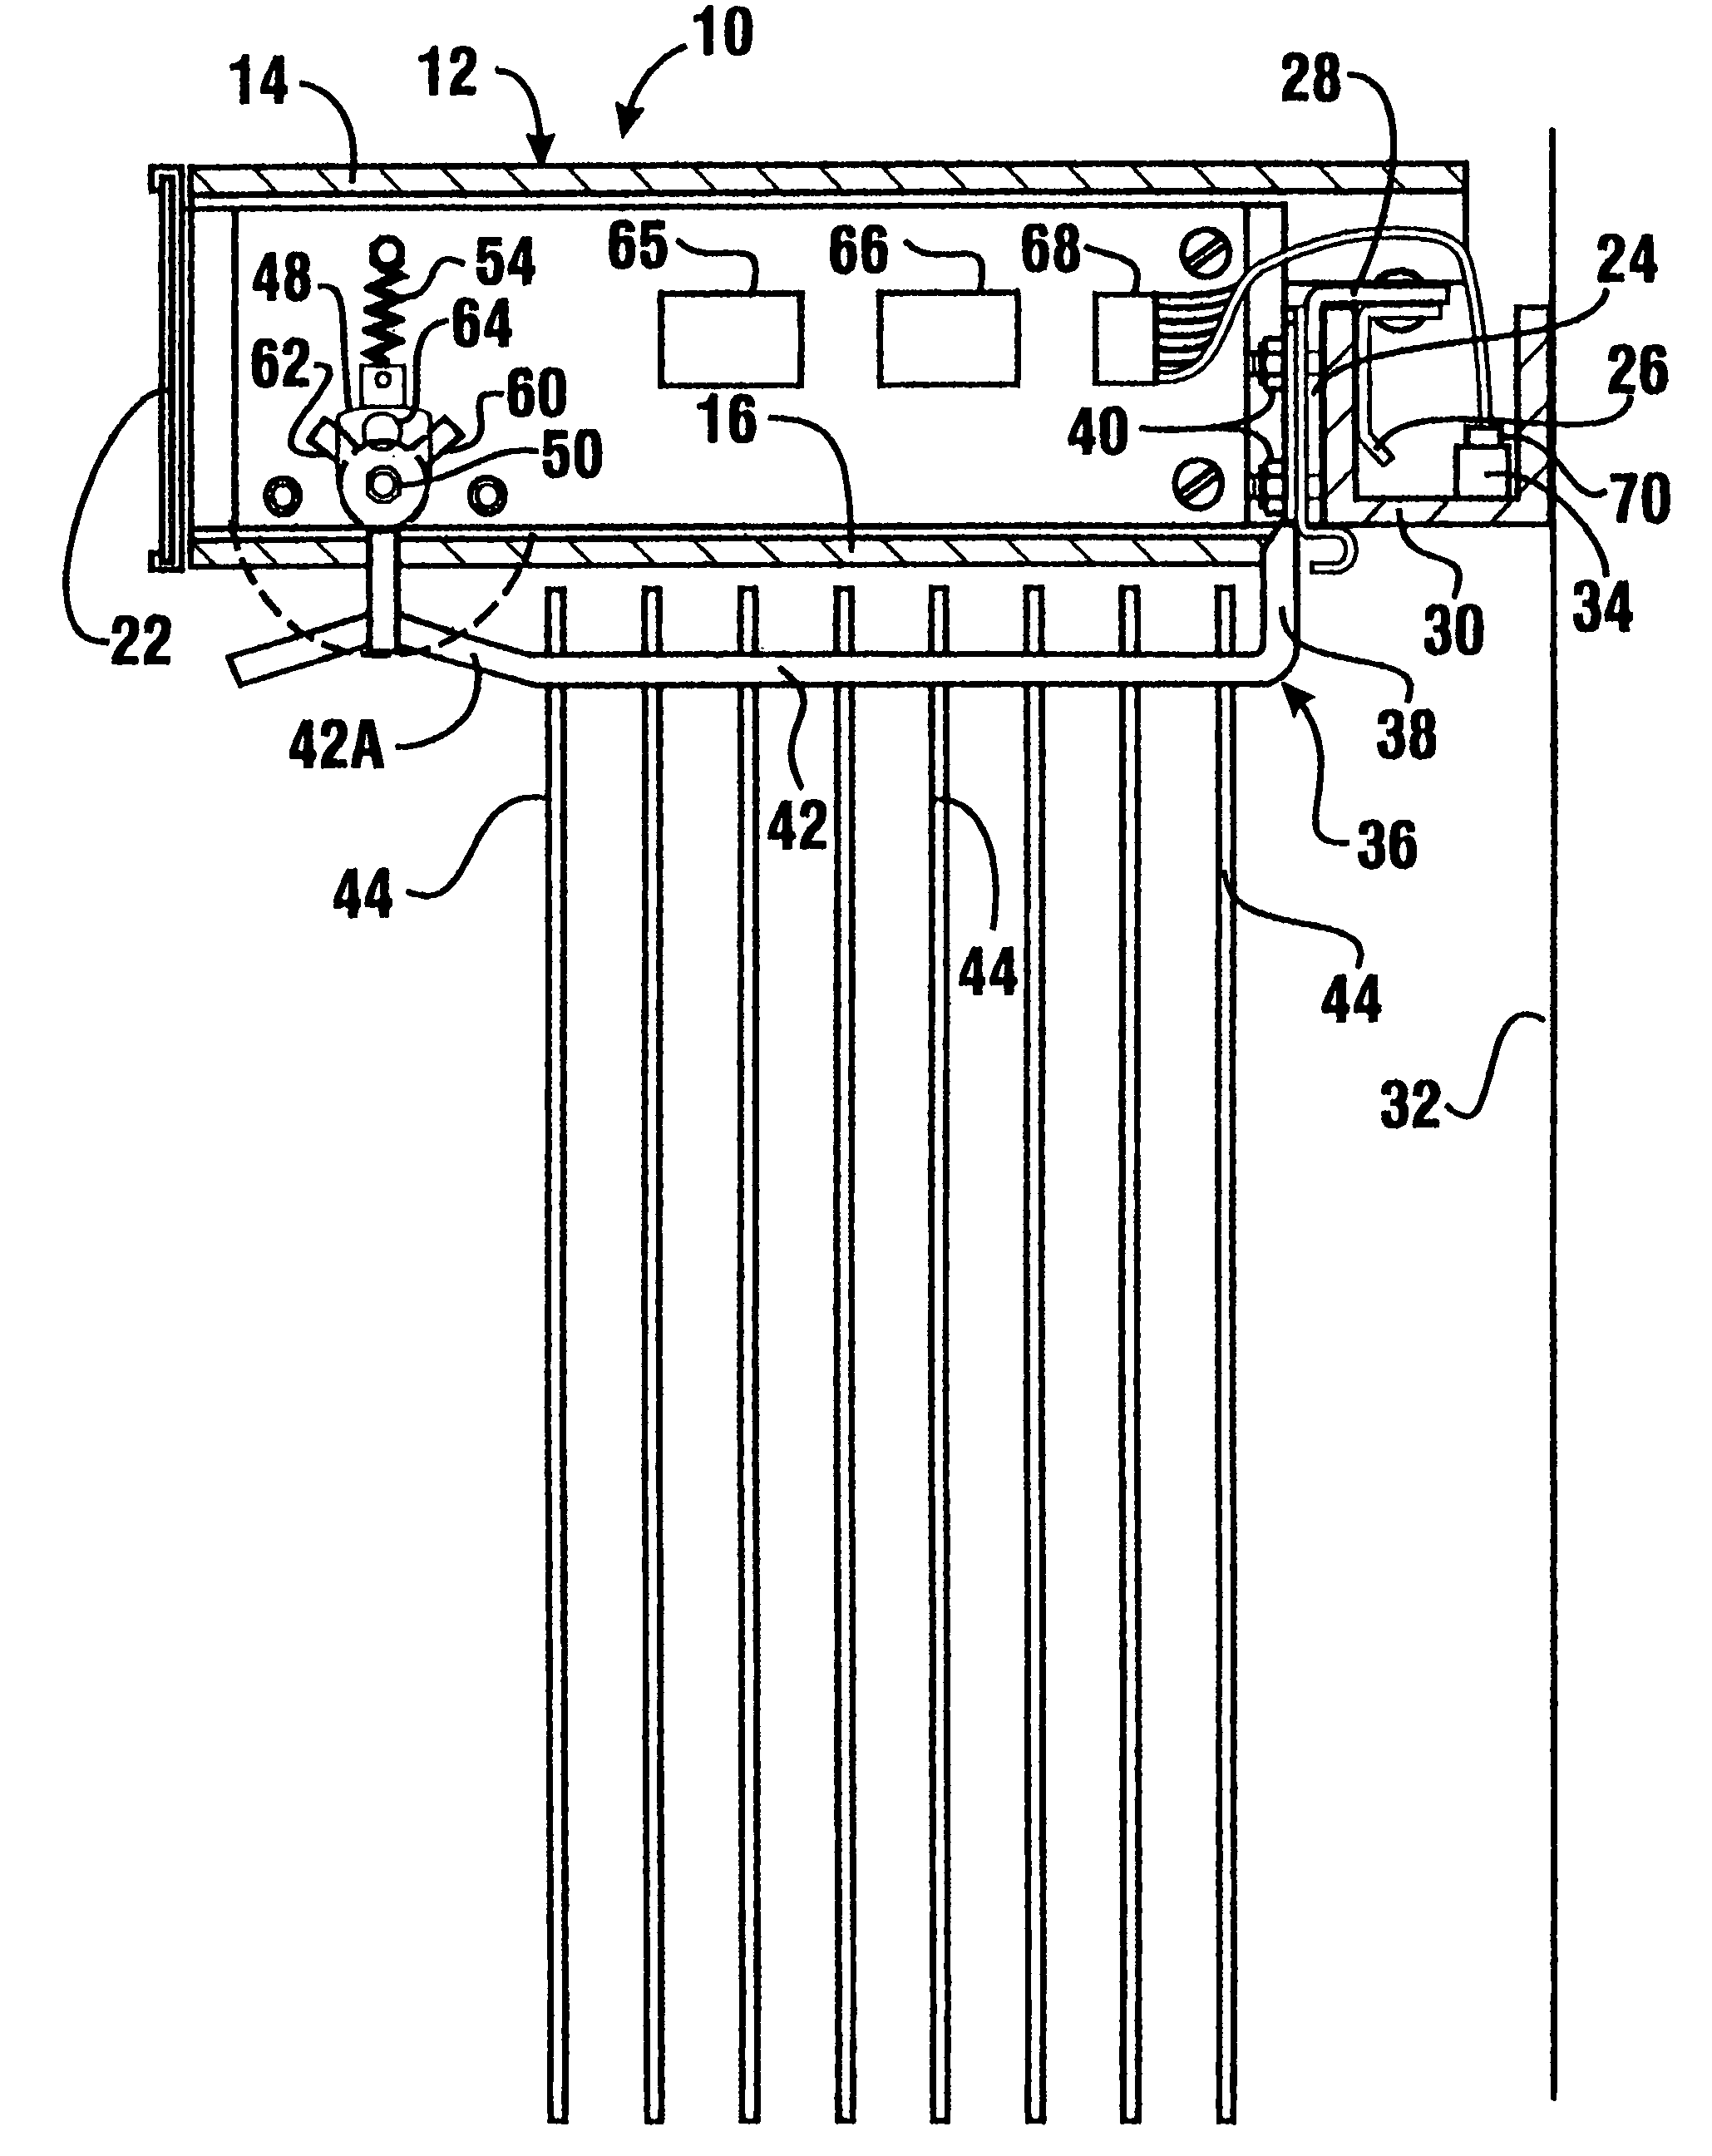 Method of tracking and dispensing medical items